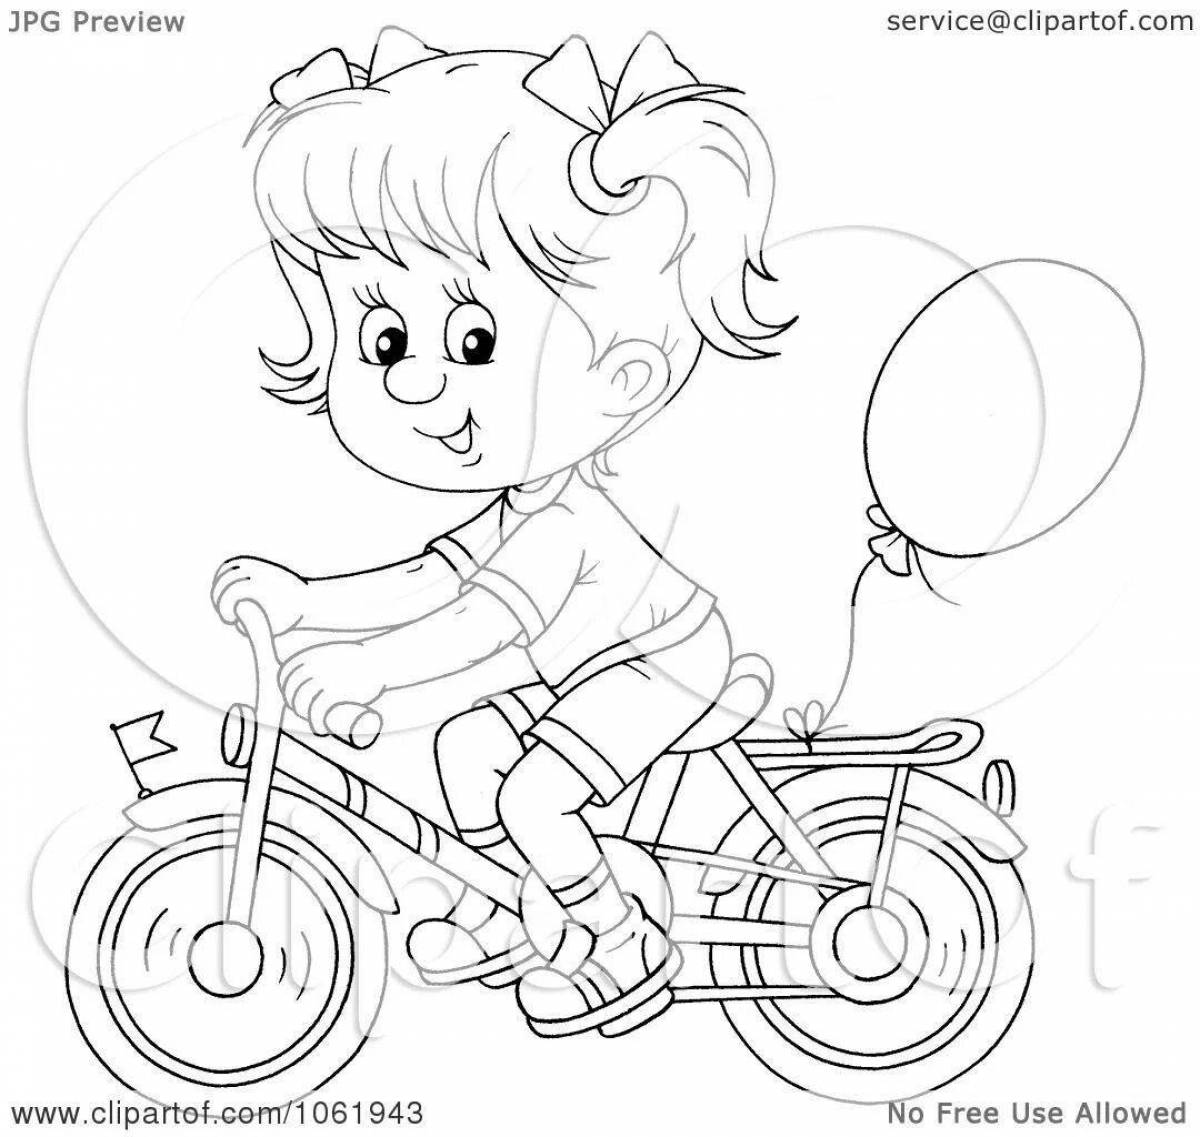 An animated girl on a bicycle